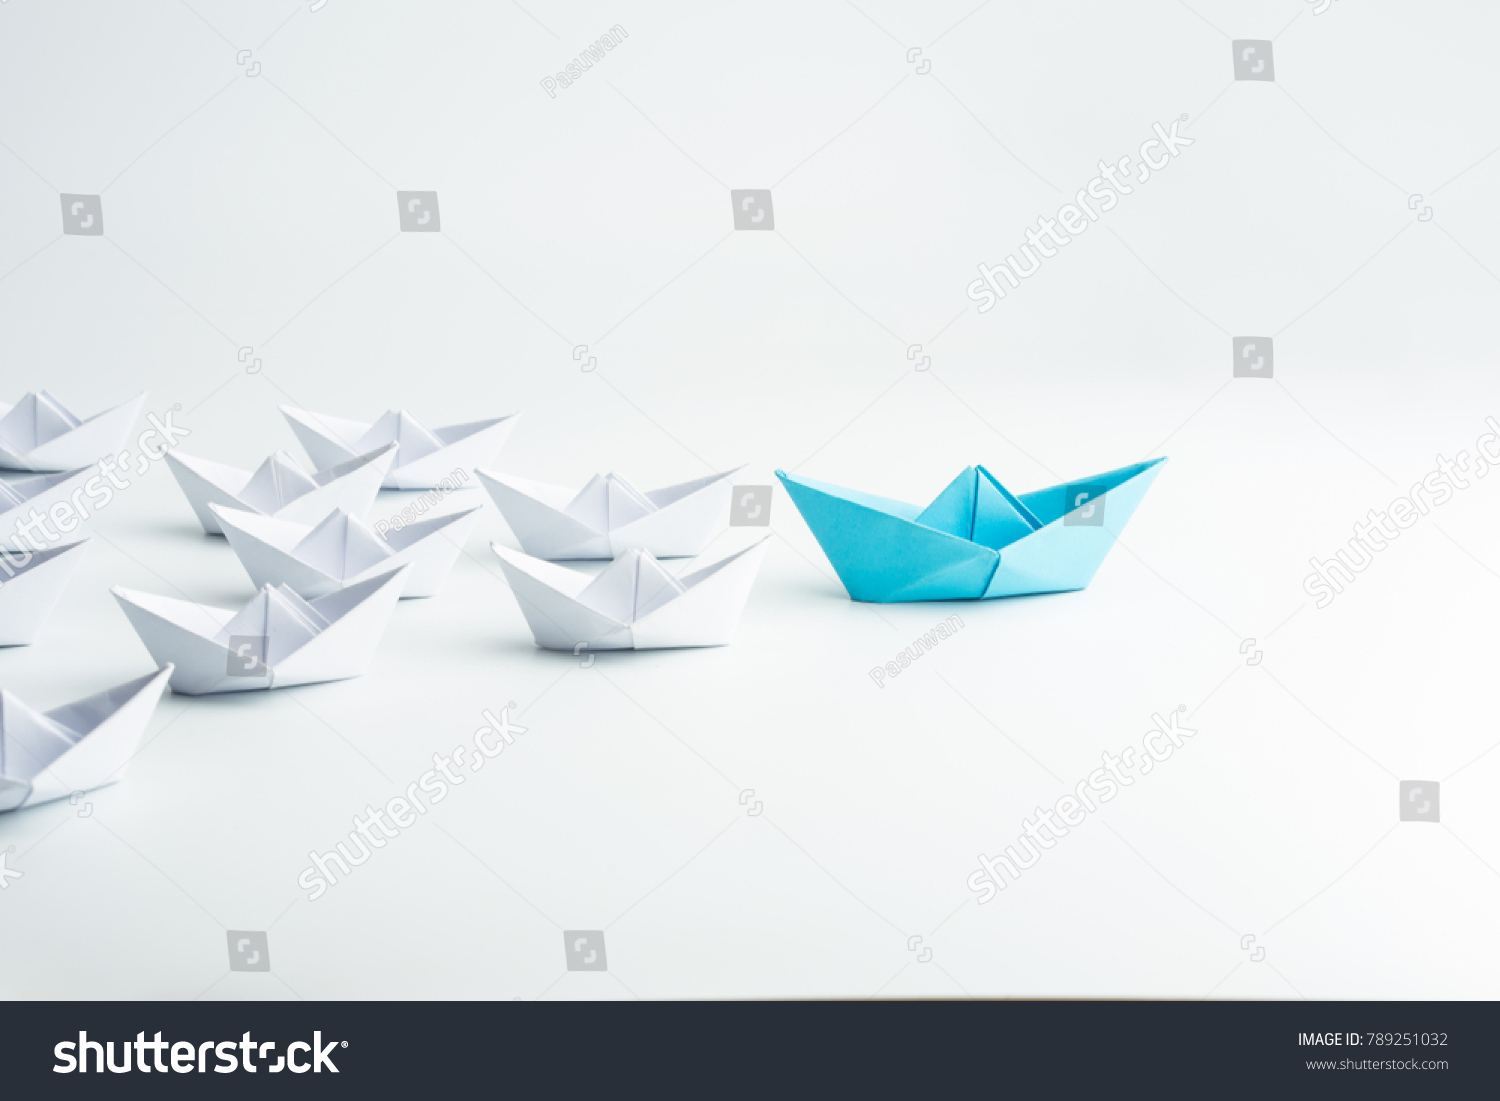 Leadership concept with blue paper ship leading among white #789251032